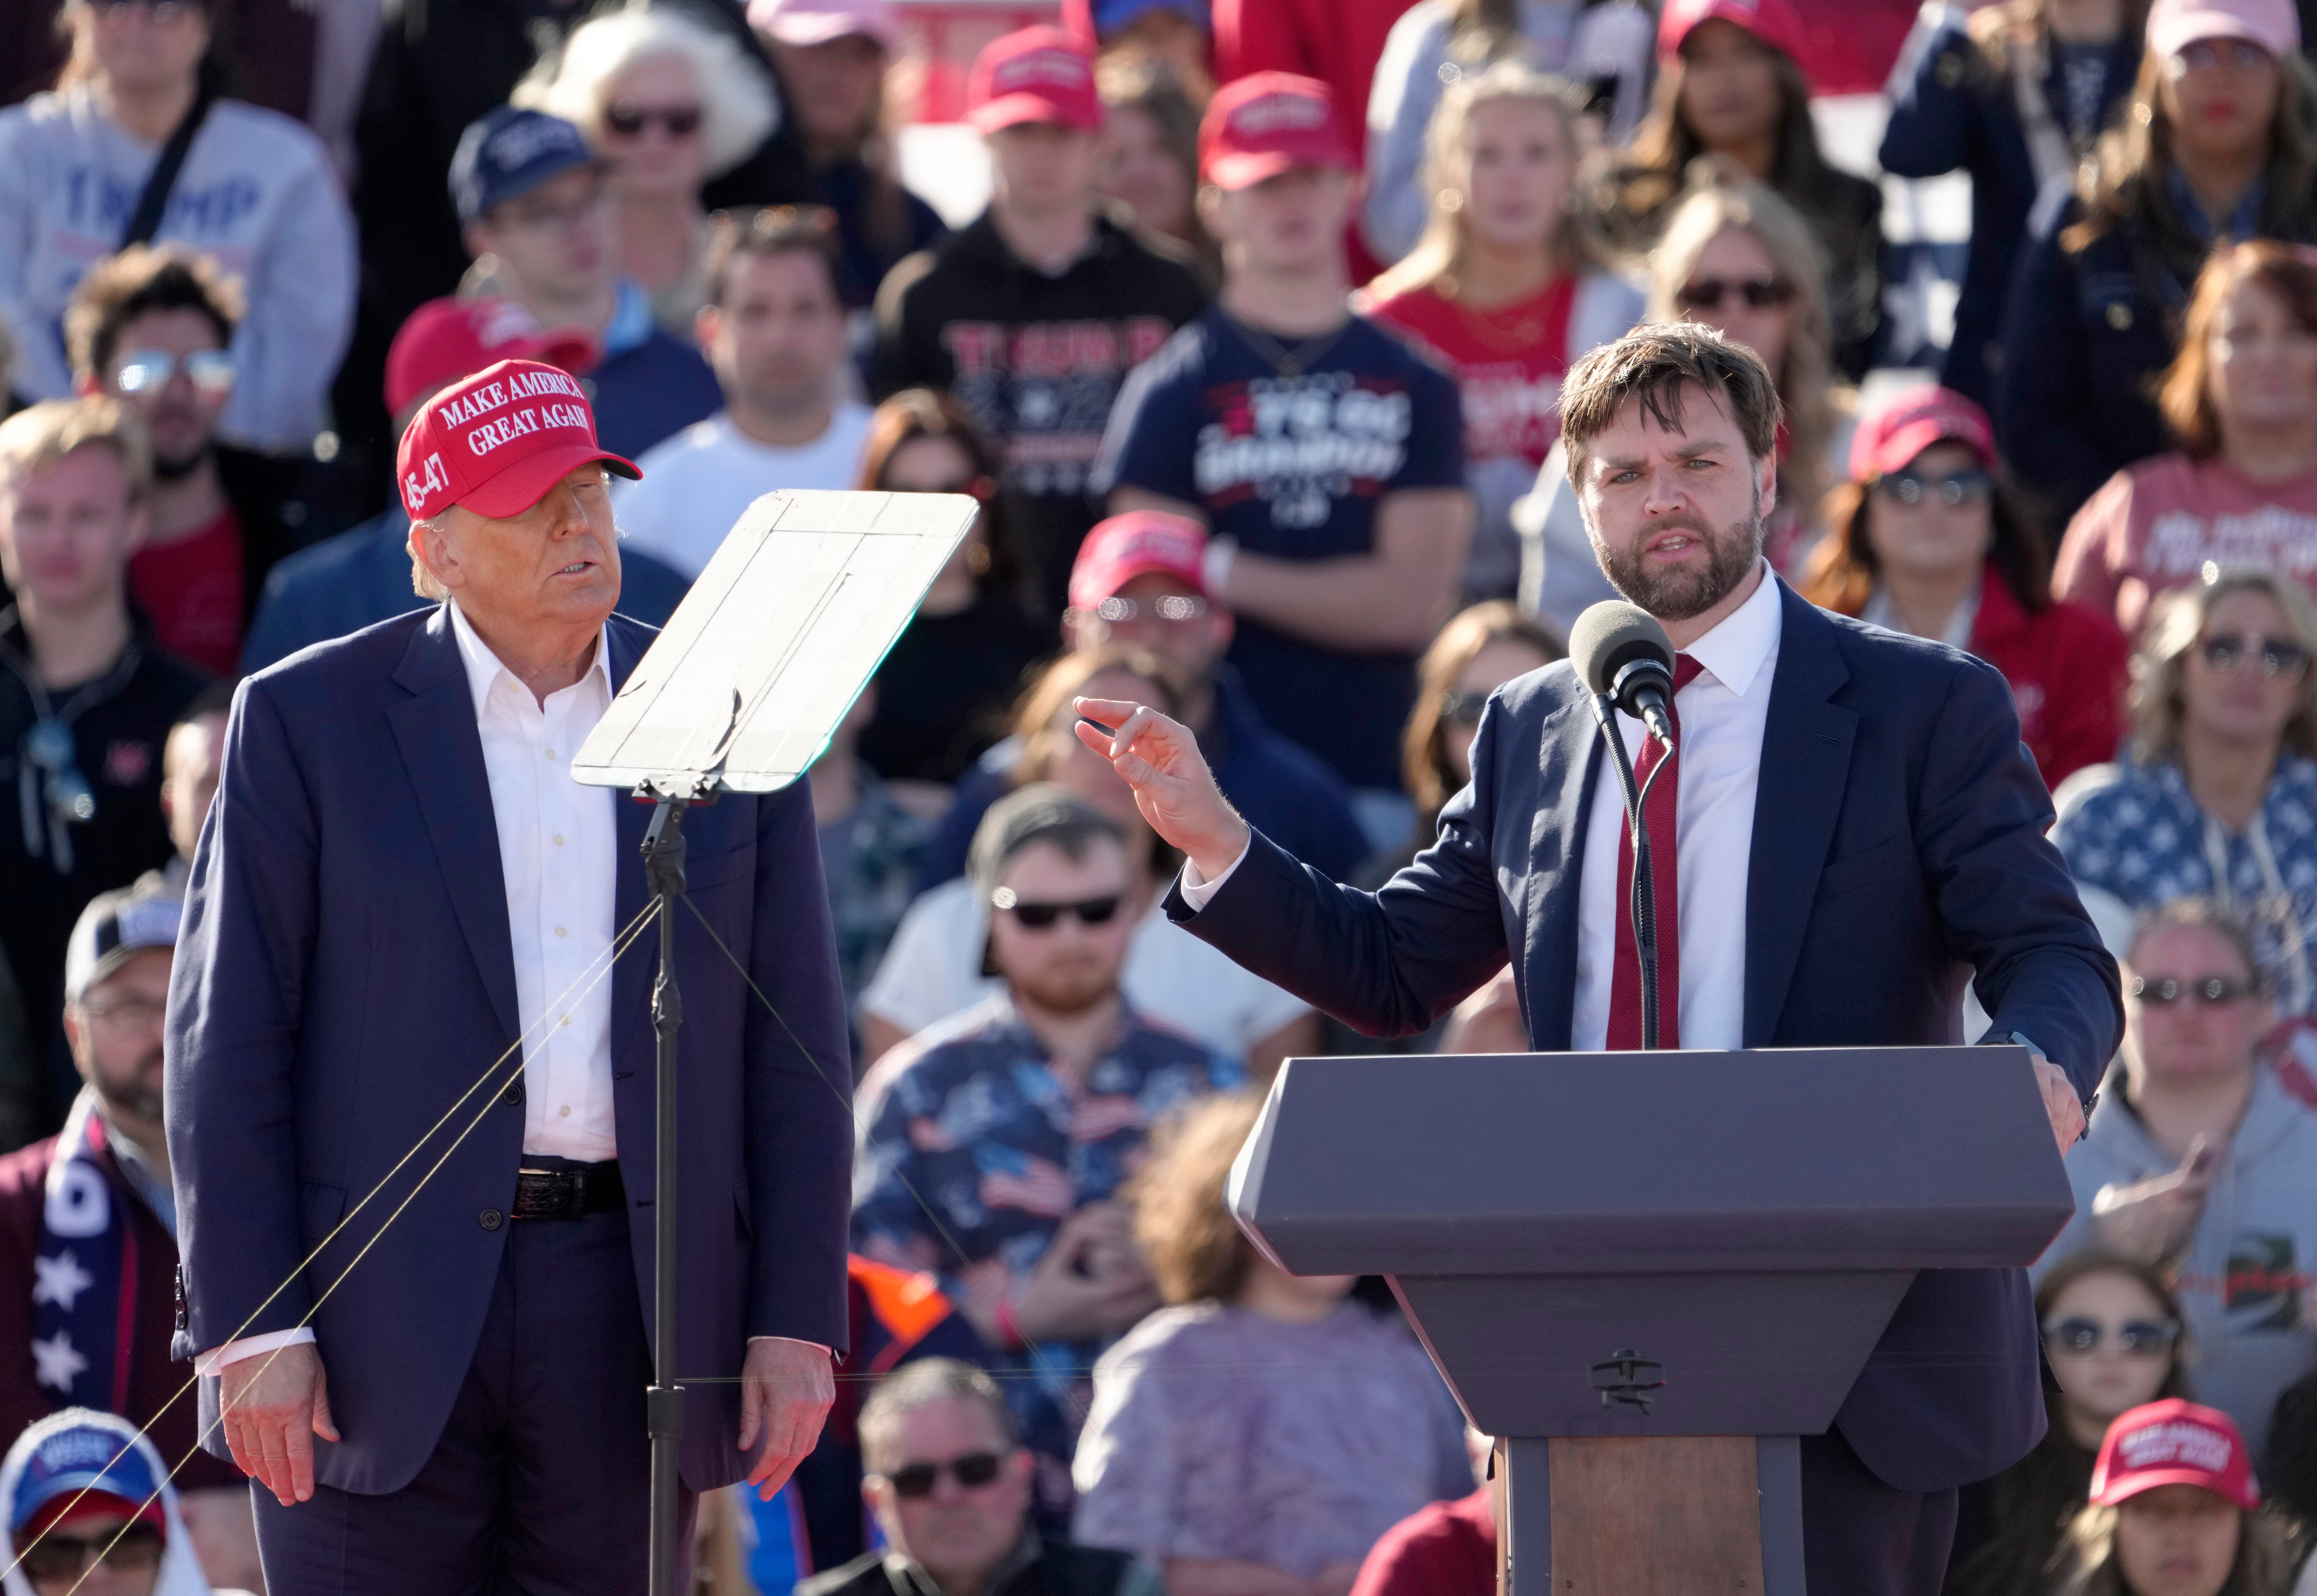 From 'Hillbilly Elegy' to the White House? How JD Vance landed on Trump's VP shortlist